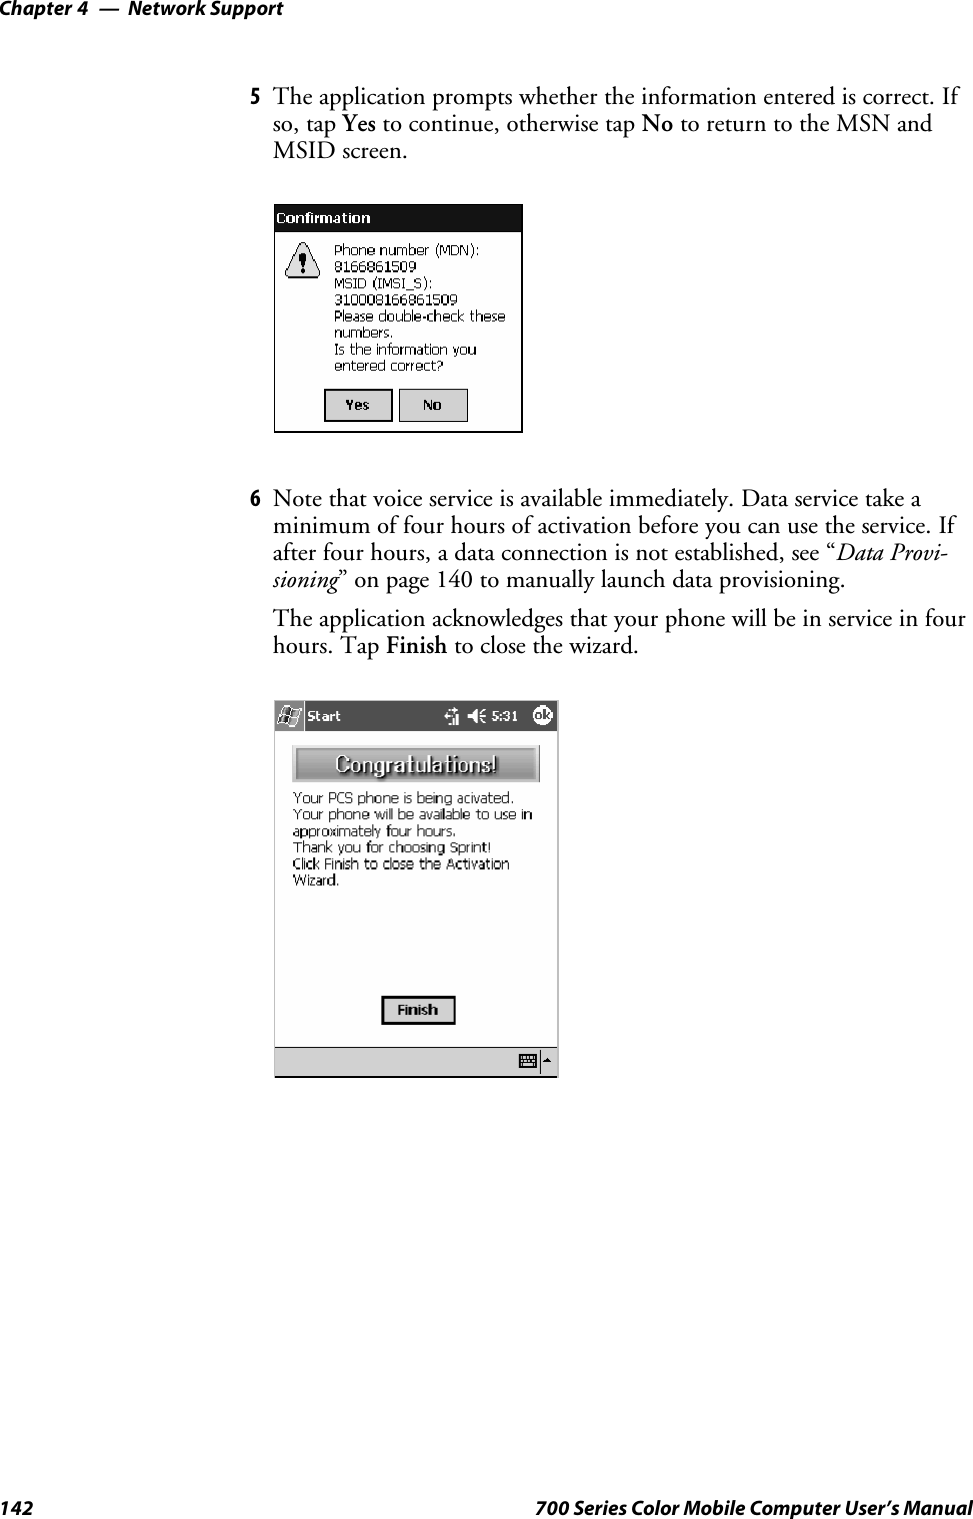 Network SupportChapter —4142 700 Series Color Mobile Computer User’s Manual5The application prompts whether the information entered is correct. Ifso, tap Yes to continue, otherwise tap No to return to the MSN andMSID screen.6Note that voice service is available immediately. Data service take aminimum of four hours of activation before you can use the service. Ifafter four hours, a data connection is not established, see “Data Provi-sioning” on page 140 to manually launch data provisioning.The application acknowledges that your phone will be in service in fourhours. Tap Finish to close the wizard.